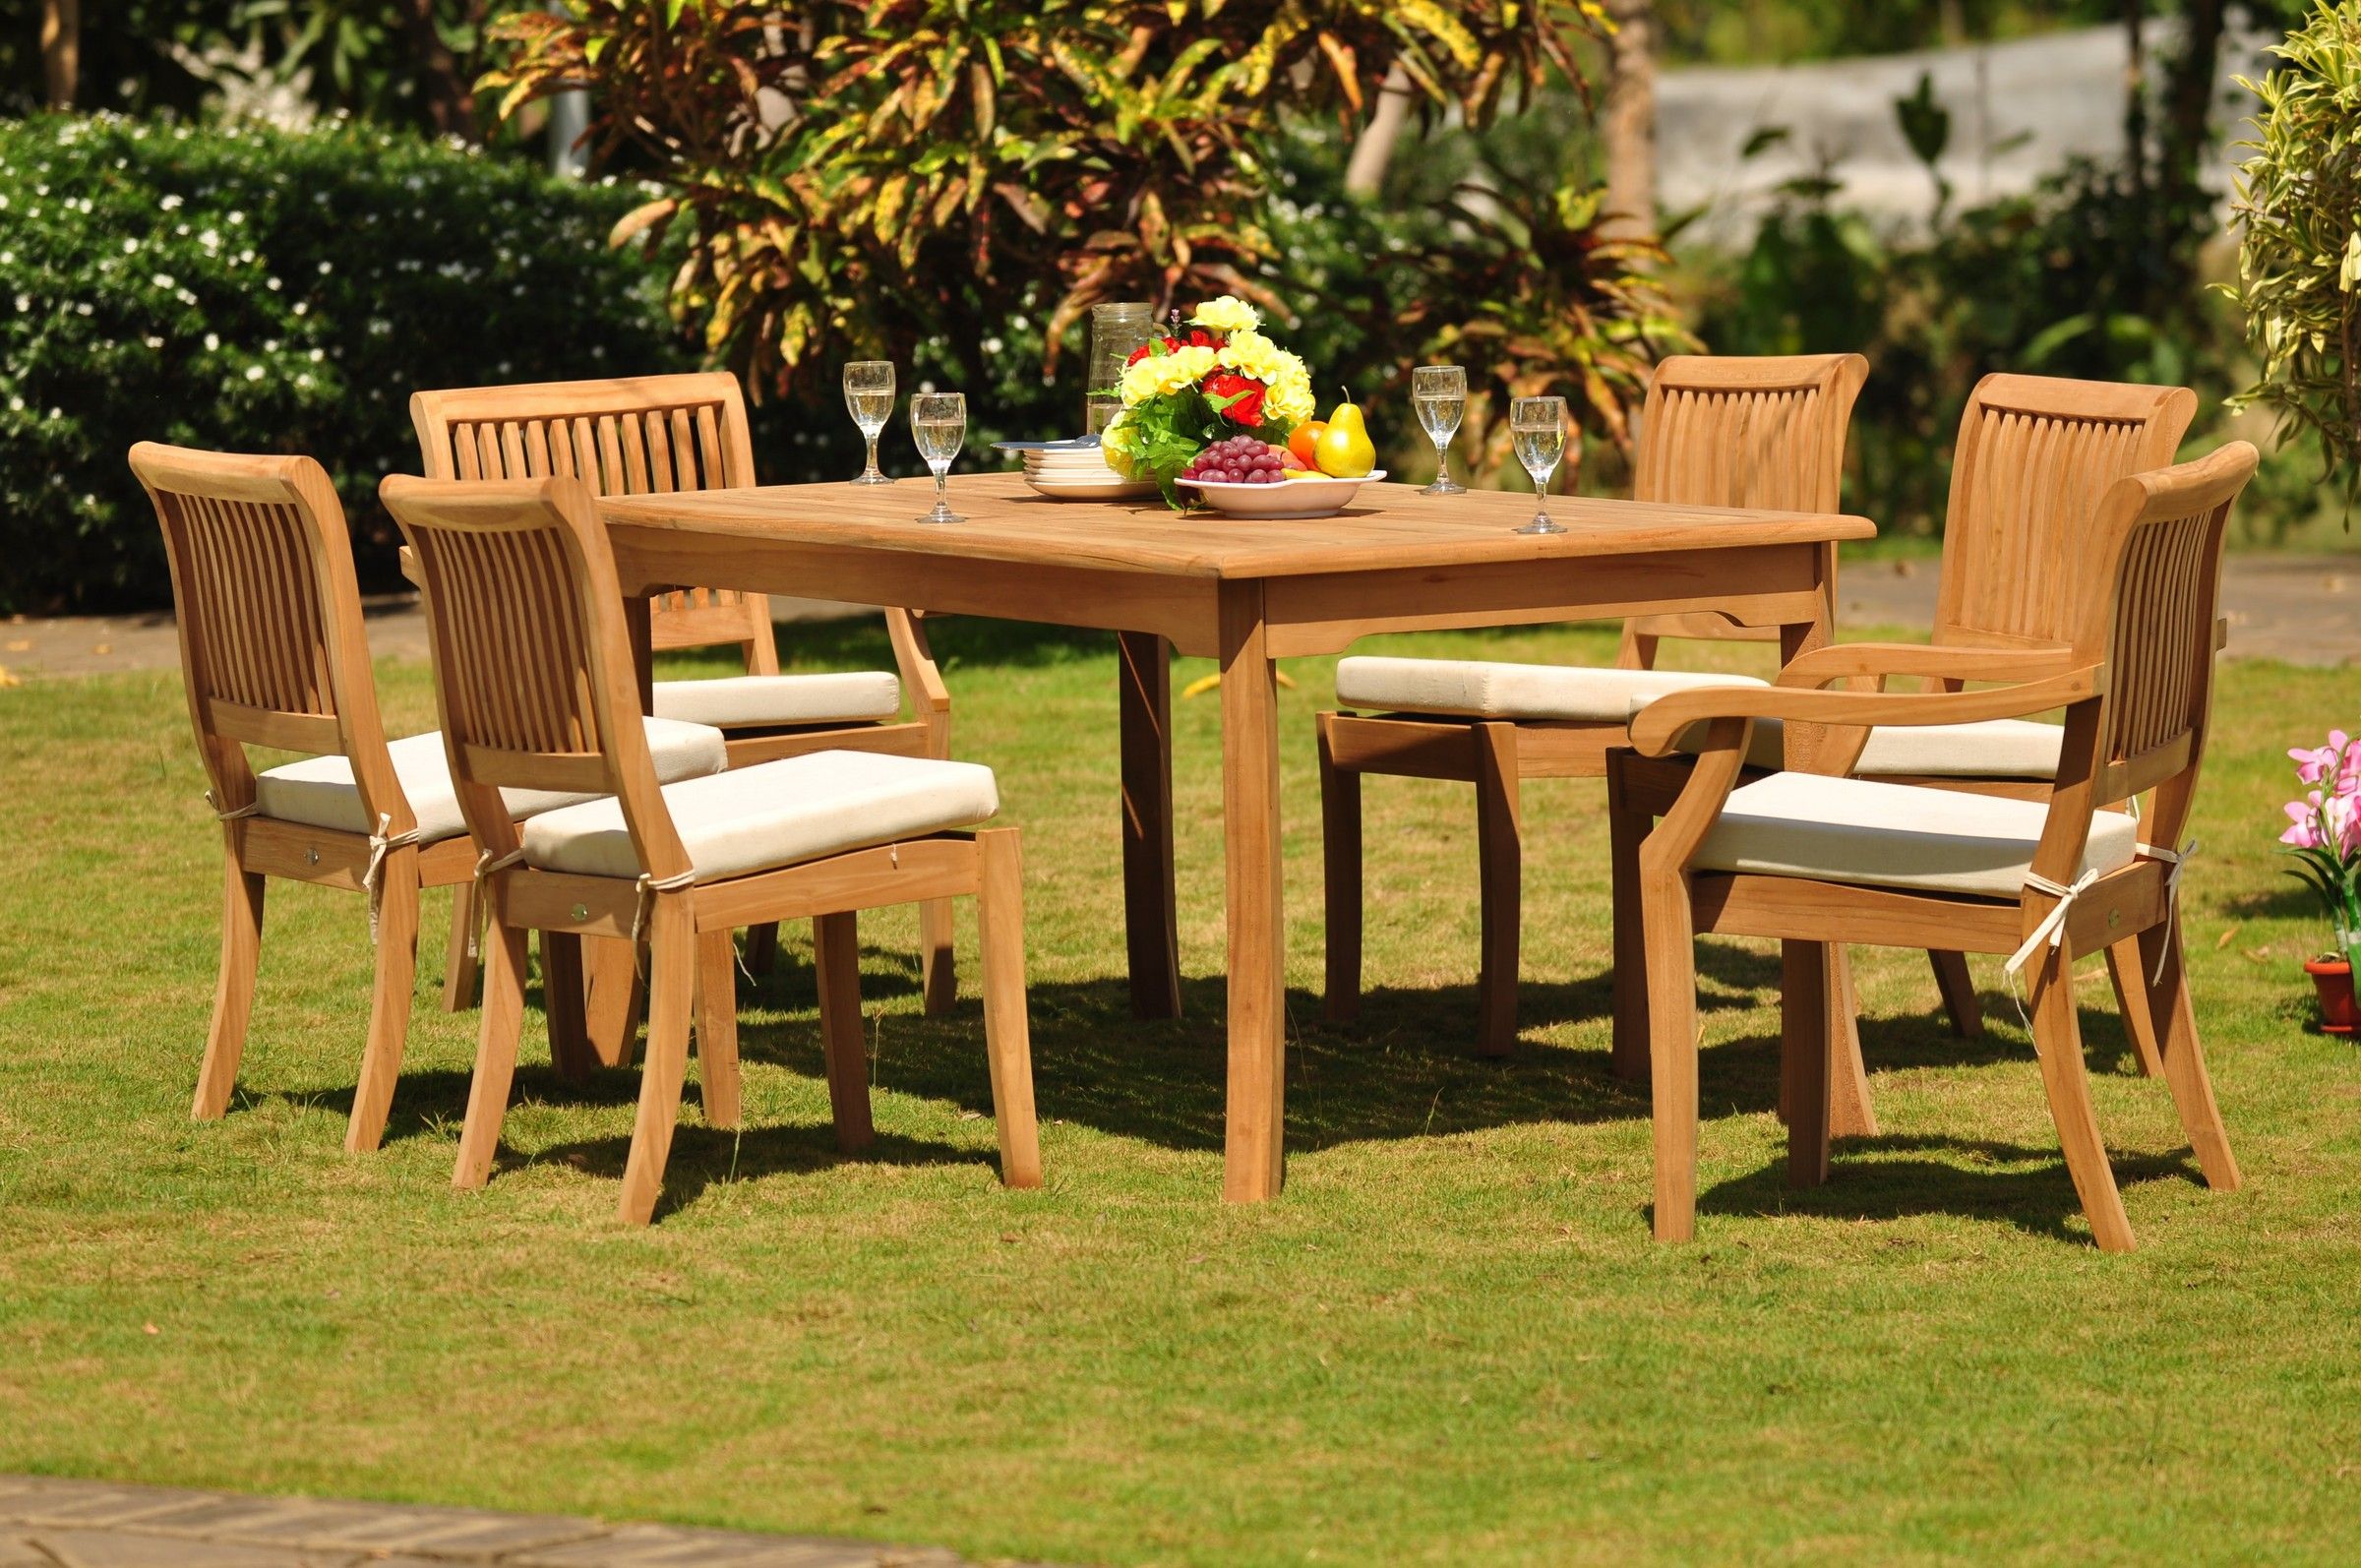 Teak Dining Set: 6 Seater 7 Pc: 71" Rectangle Table & 2 Stacking Arbor Intended For Teak Wood Outdoor Table And Chairs Sets (View 2 of 15)